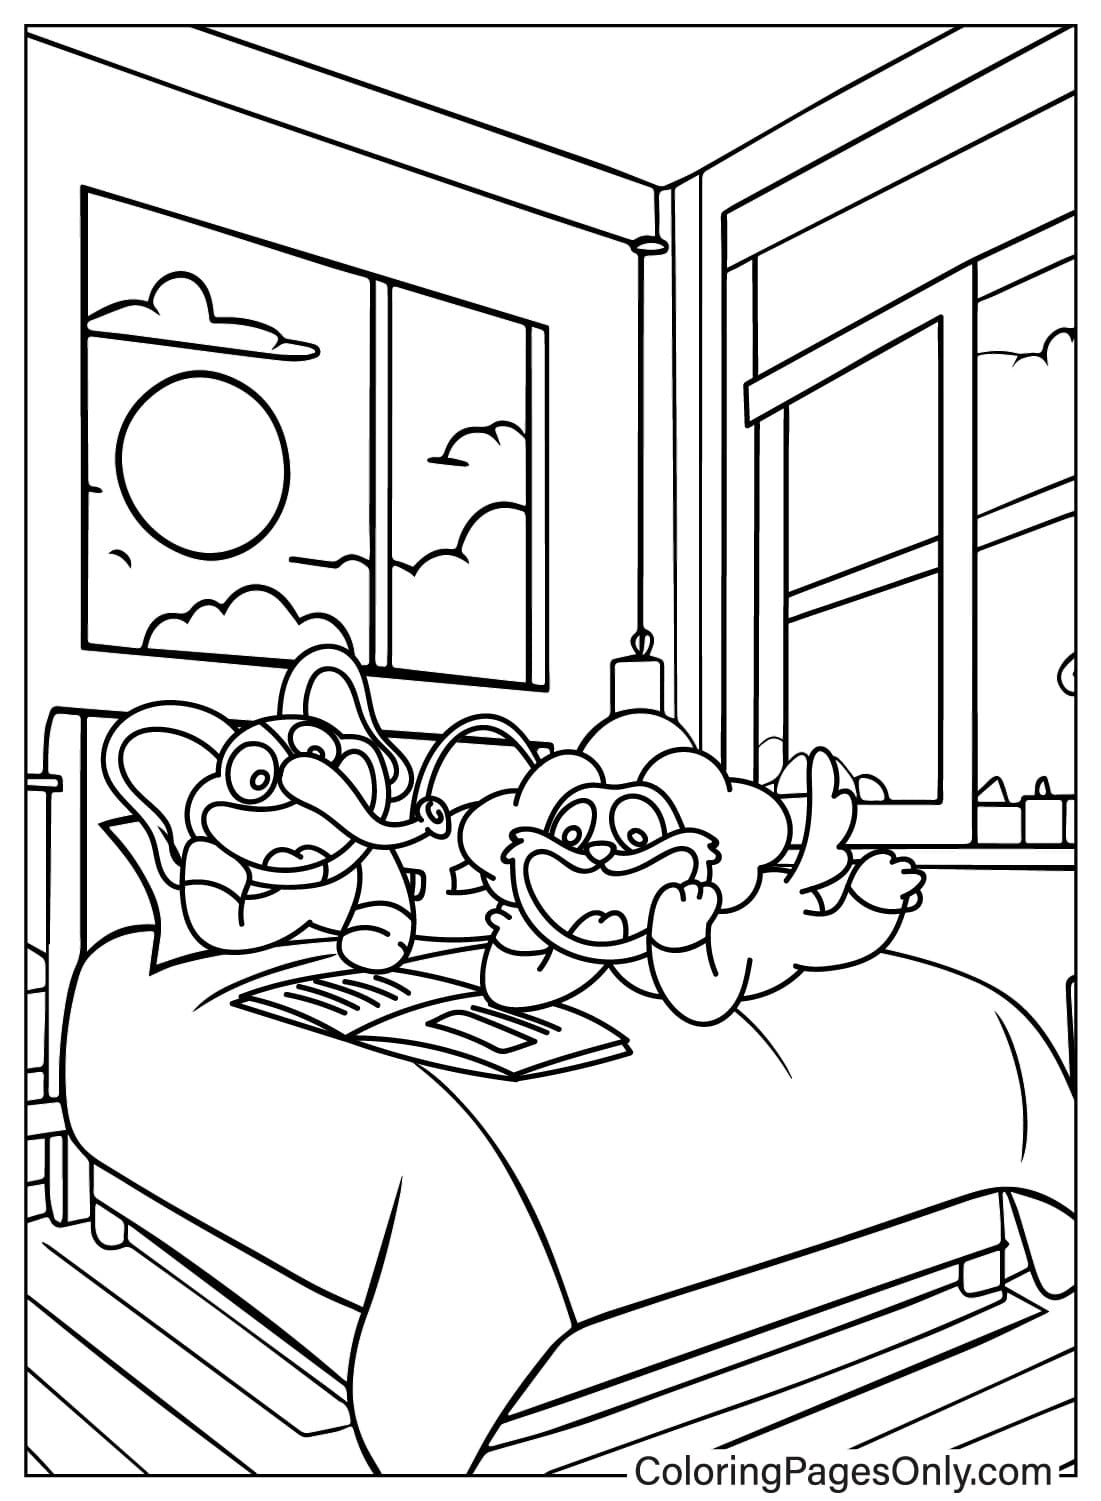 Bubba Bubbaphant and DogDay Coloring Page from DogDay